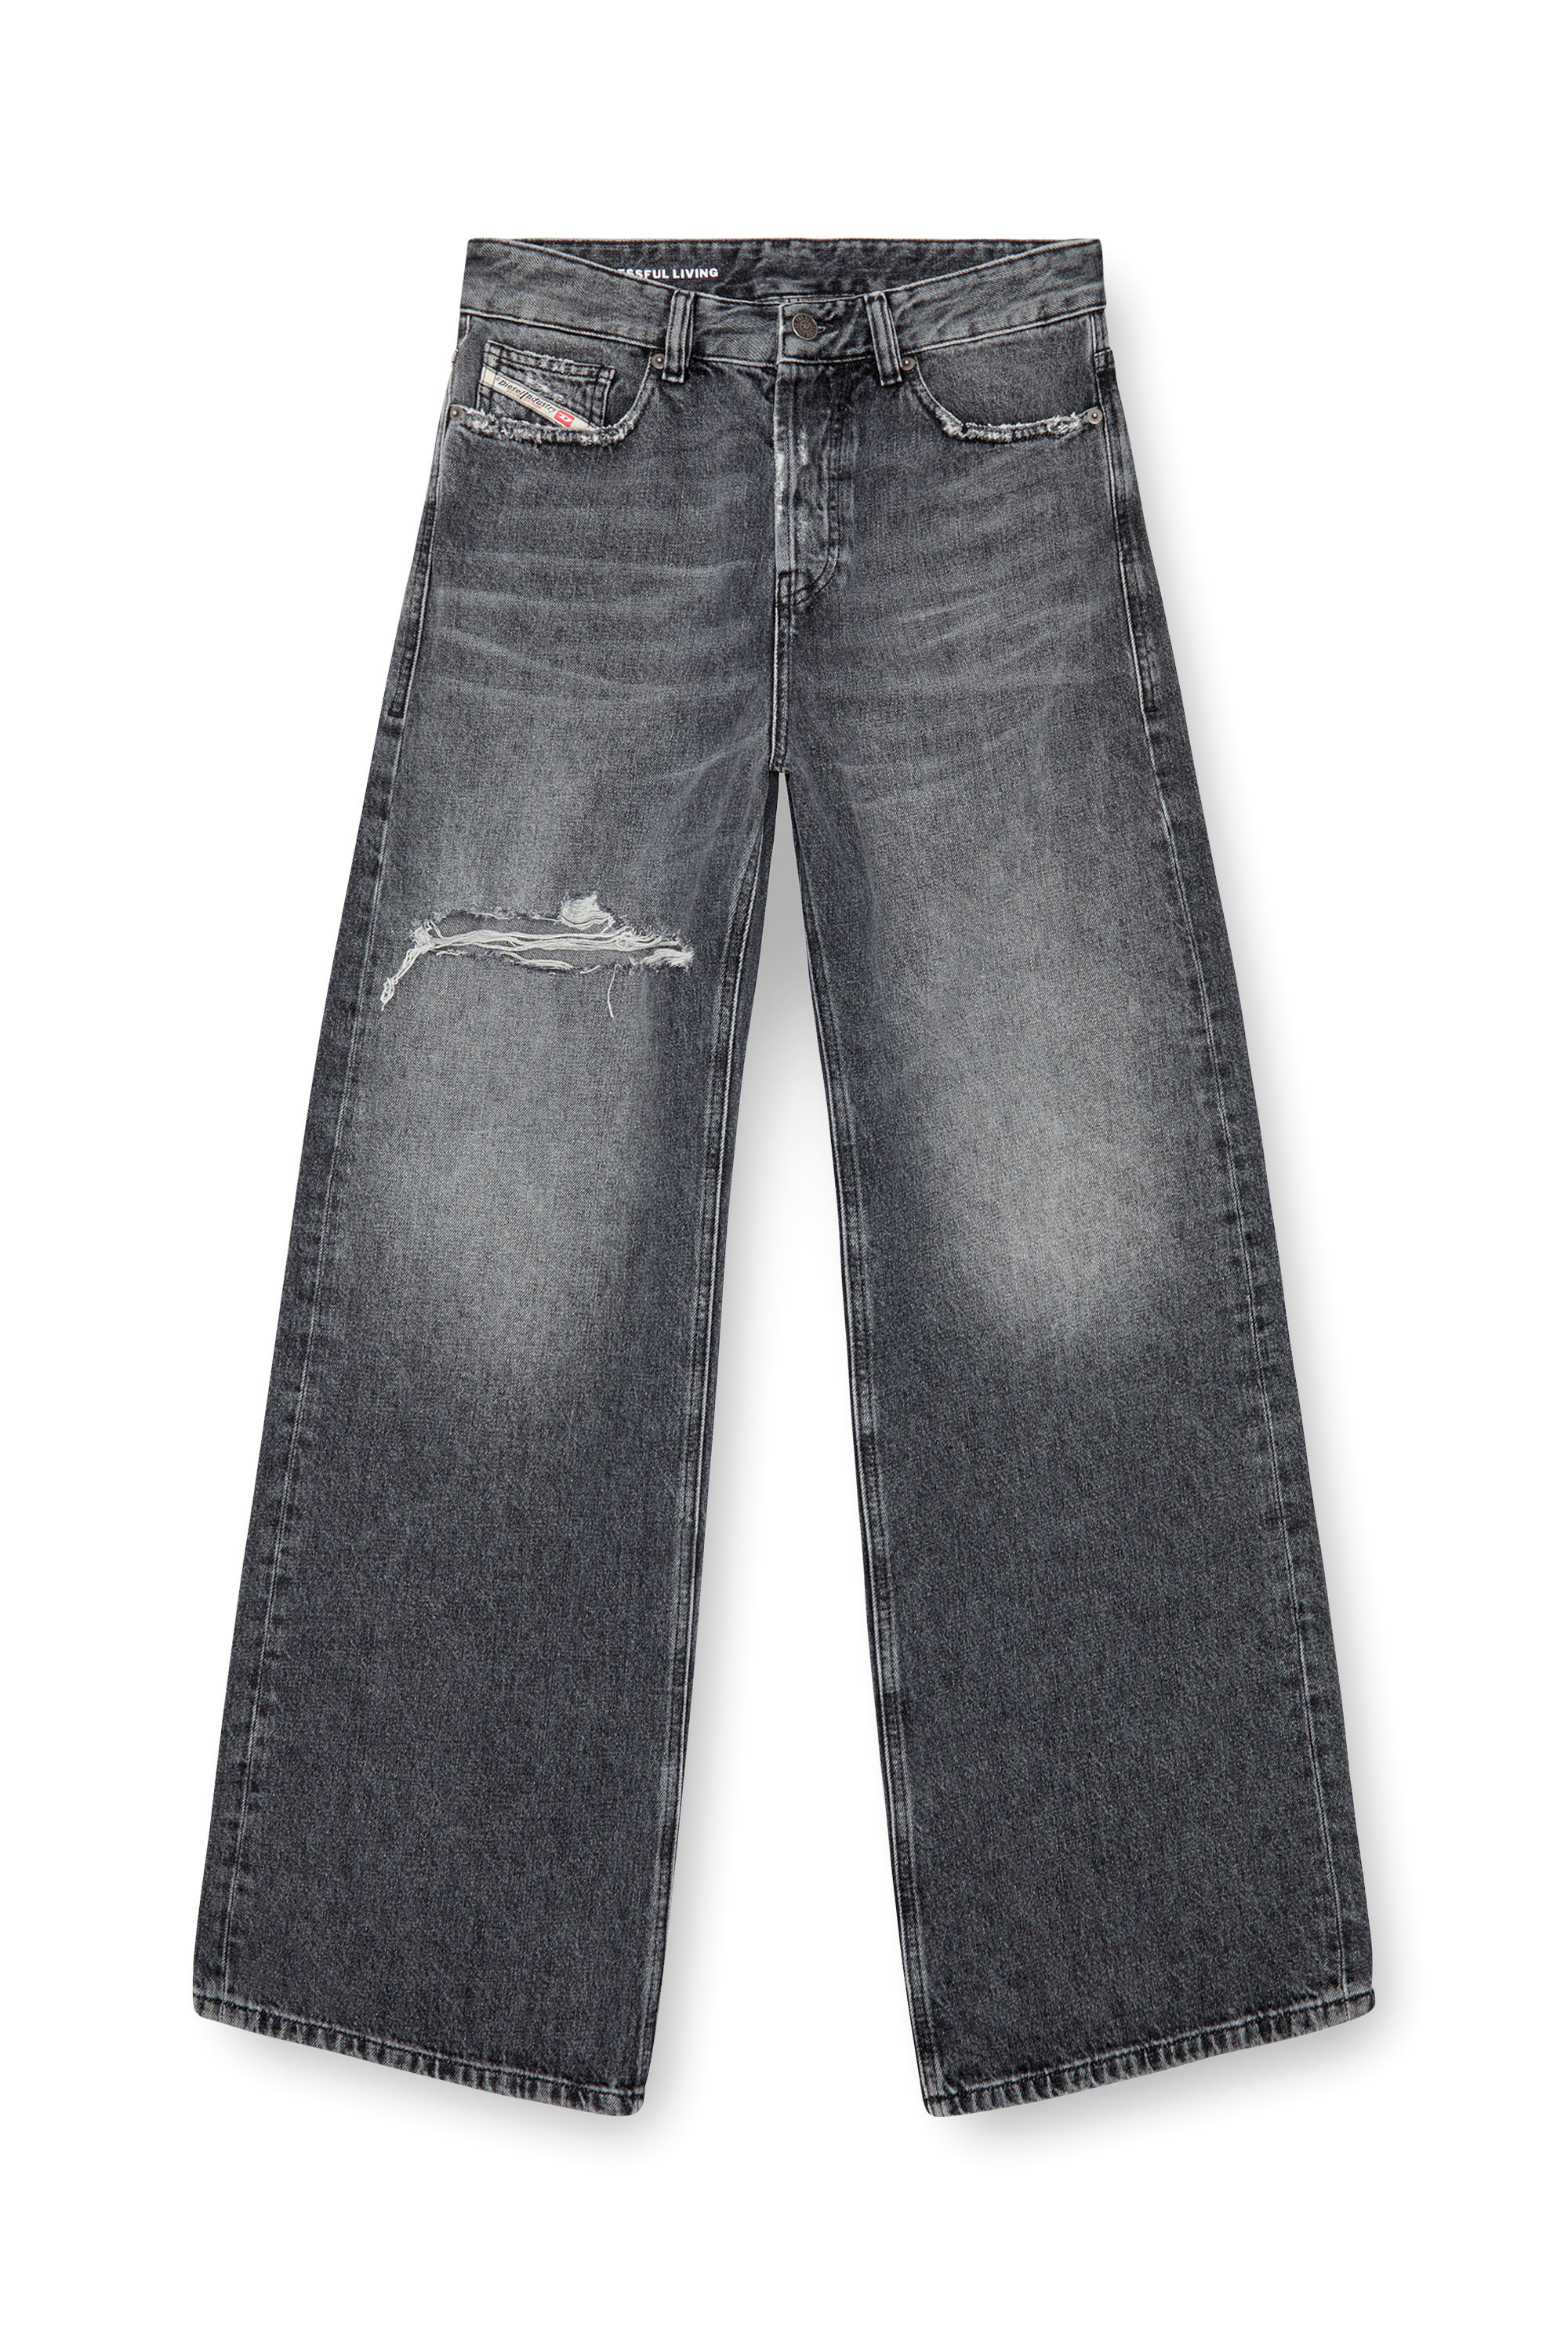 Diesel - Straight Jeans 1996 D-Sire 007X4, Mujer Straight Jeans - 1996 D-Sire in Negro - Image 5